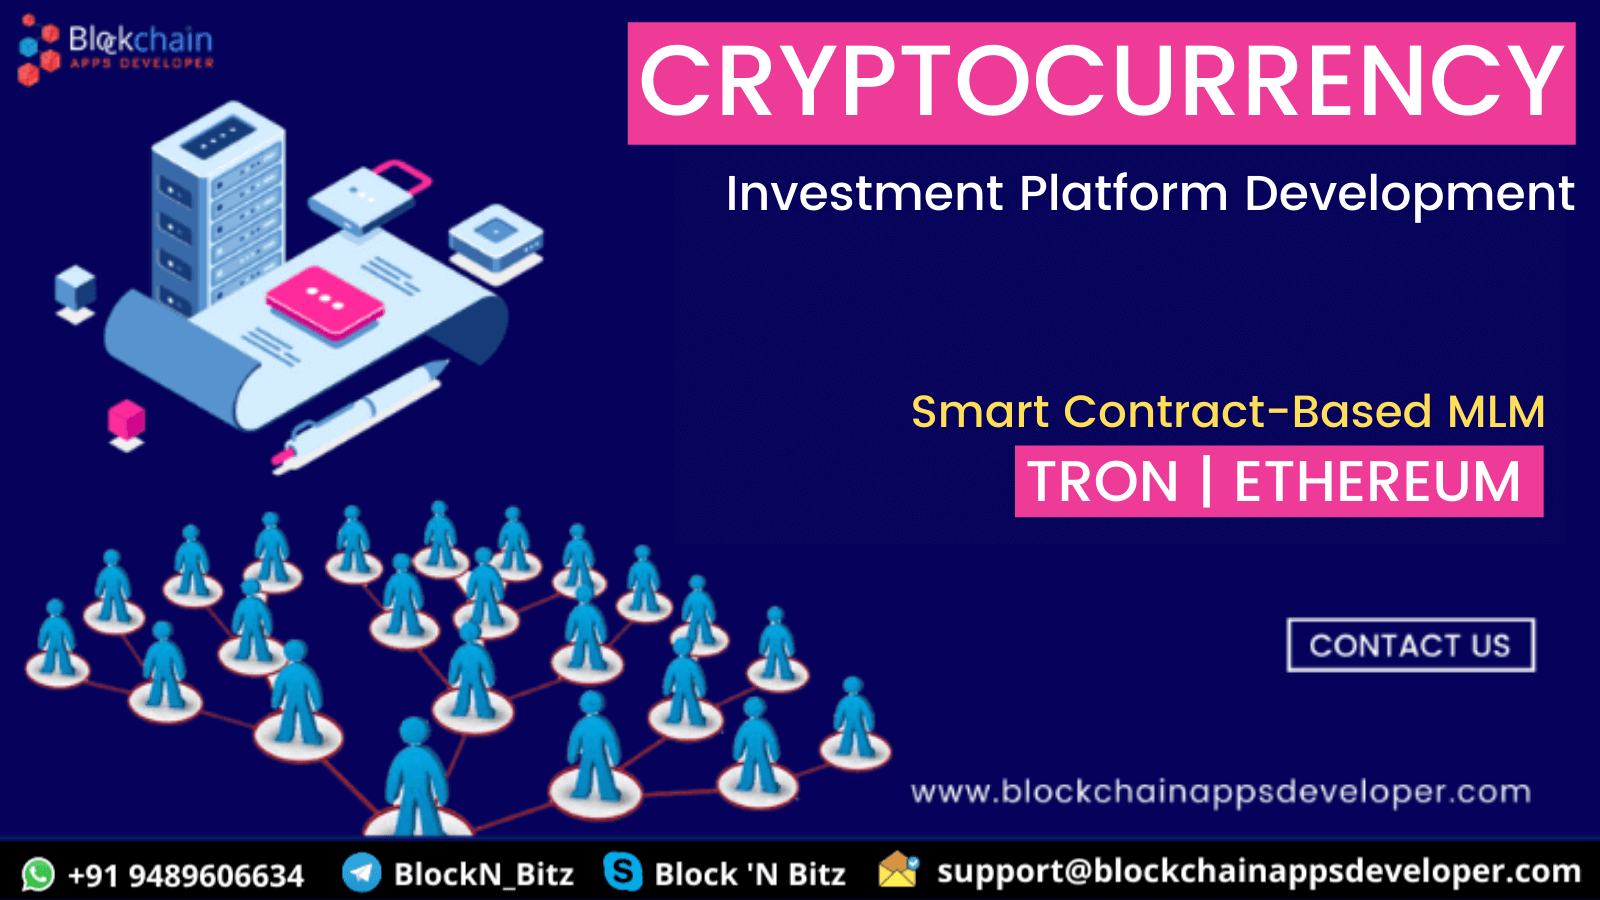 WHY DO YOU NEED TO DEVELOP A SMART CONTRACT-BASED MLM & INVESTMENT PLATFORM ON ETHEREUM / TRON NETWORK?